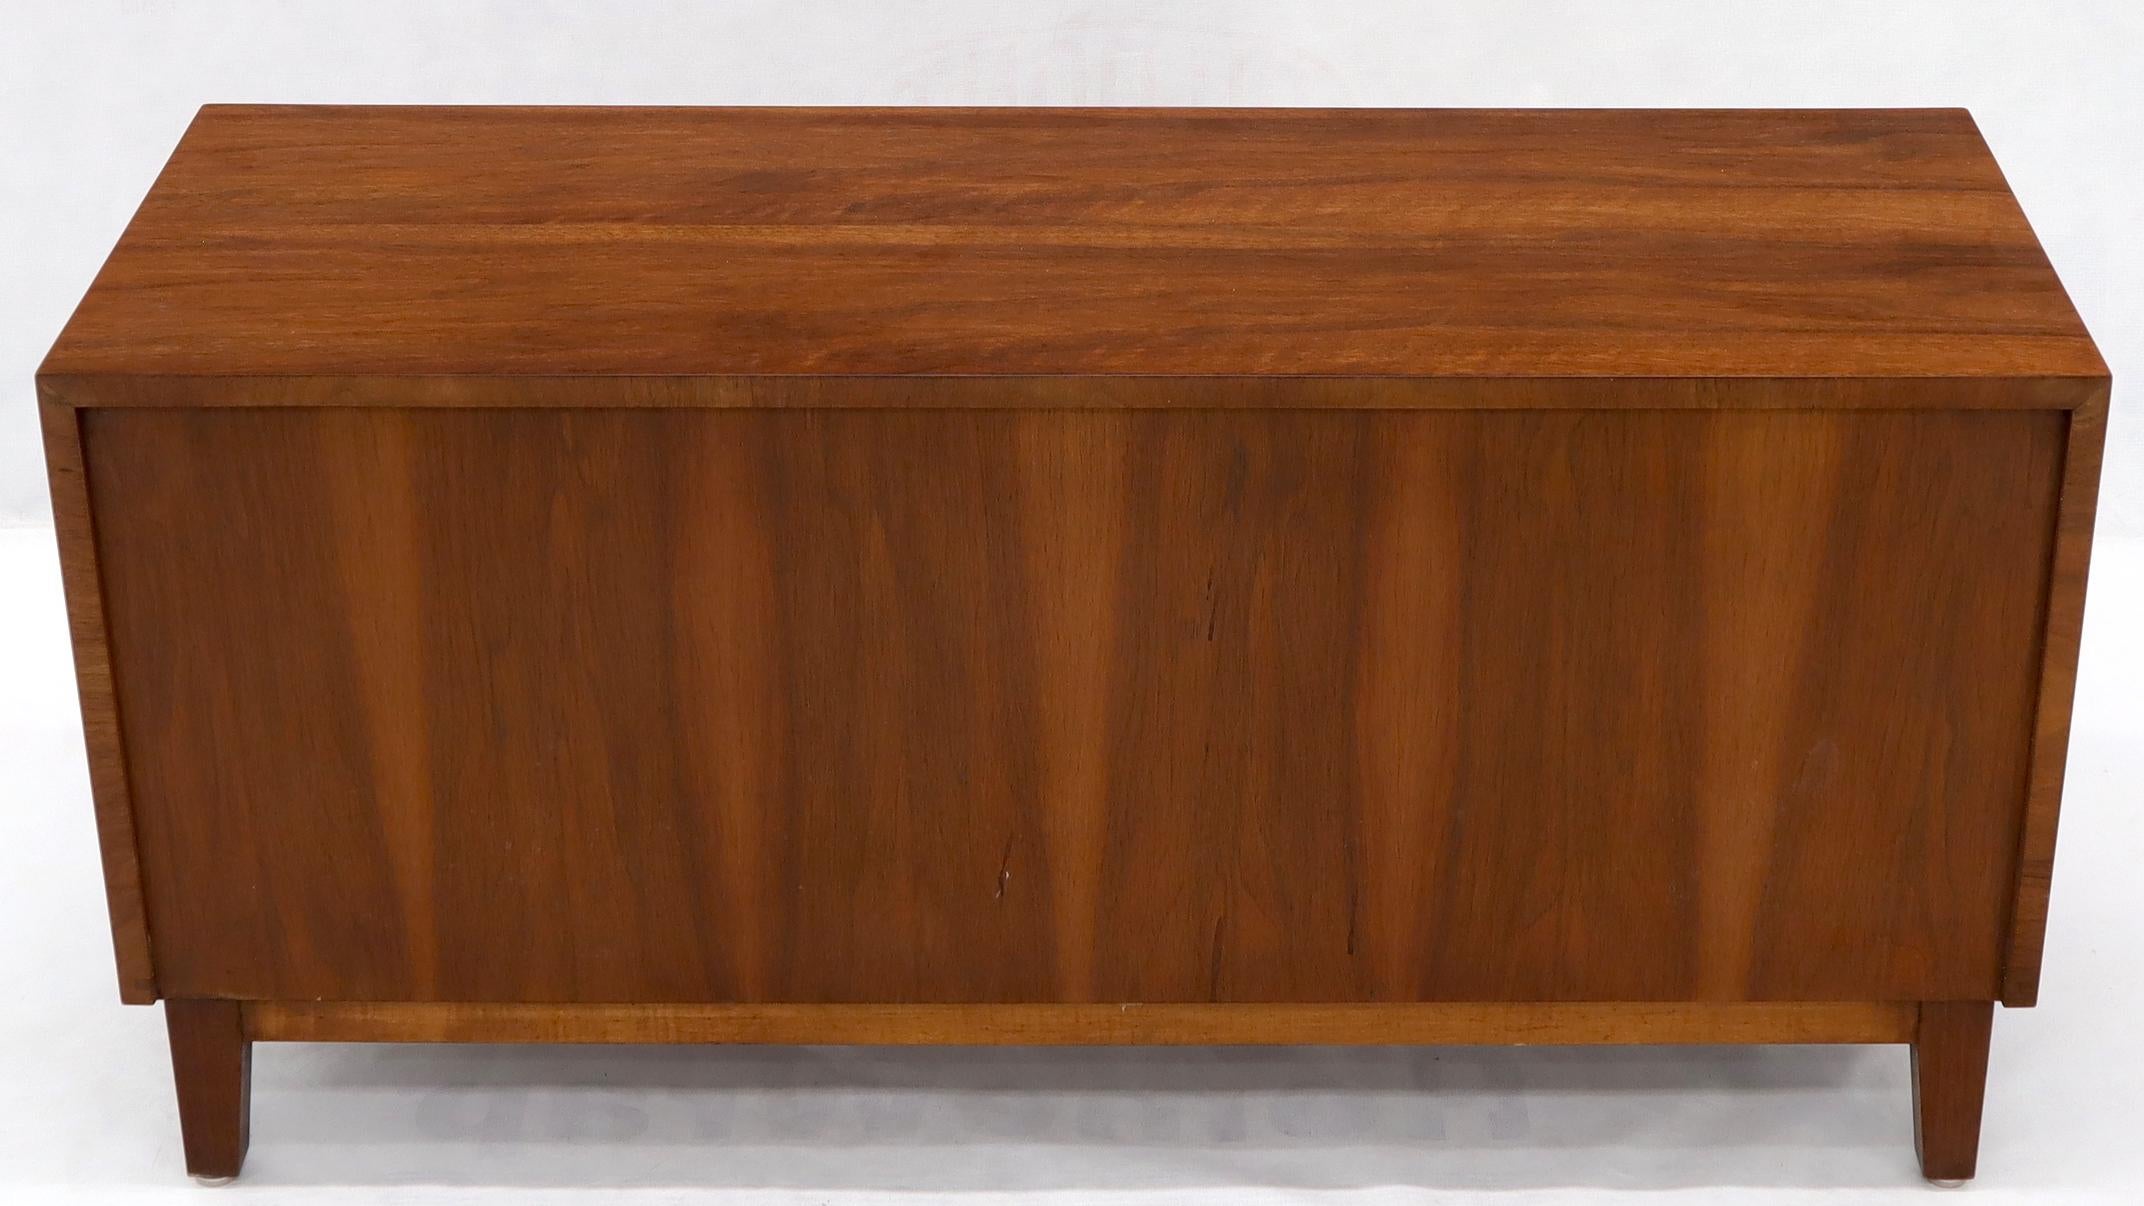 Lacquered Two Door Sculpted Front Small Walnut Credenza Dresser with Brass Accents